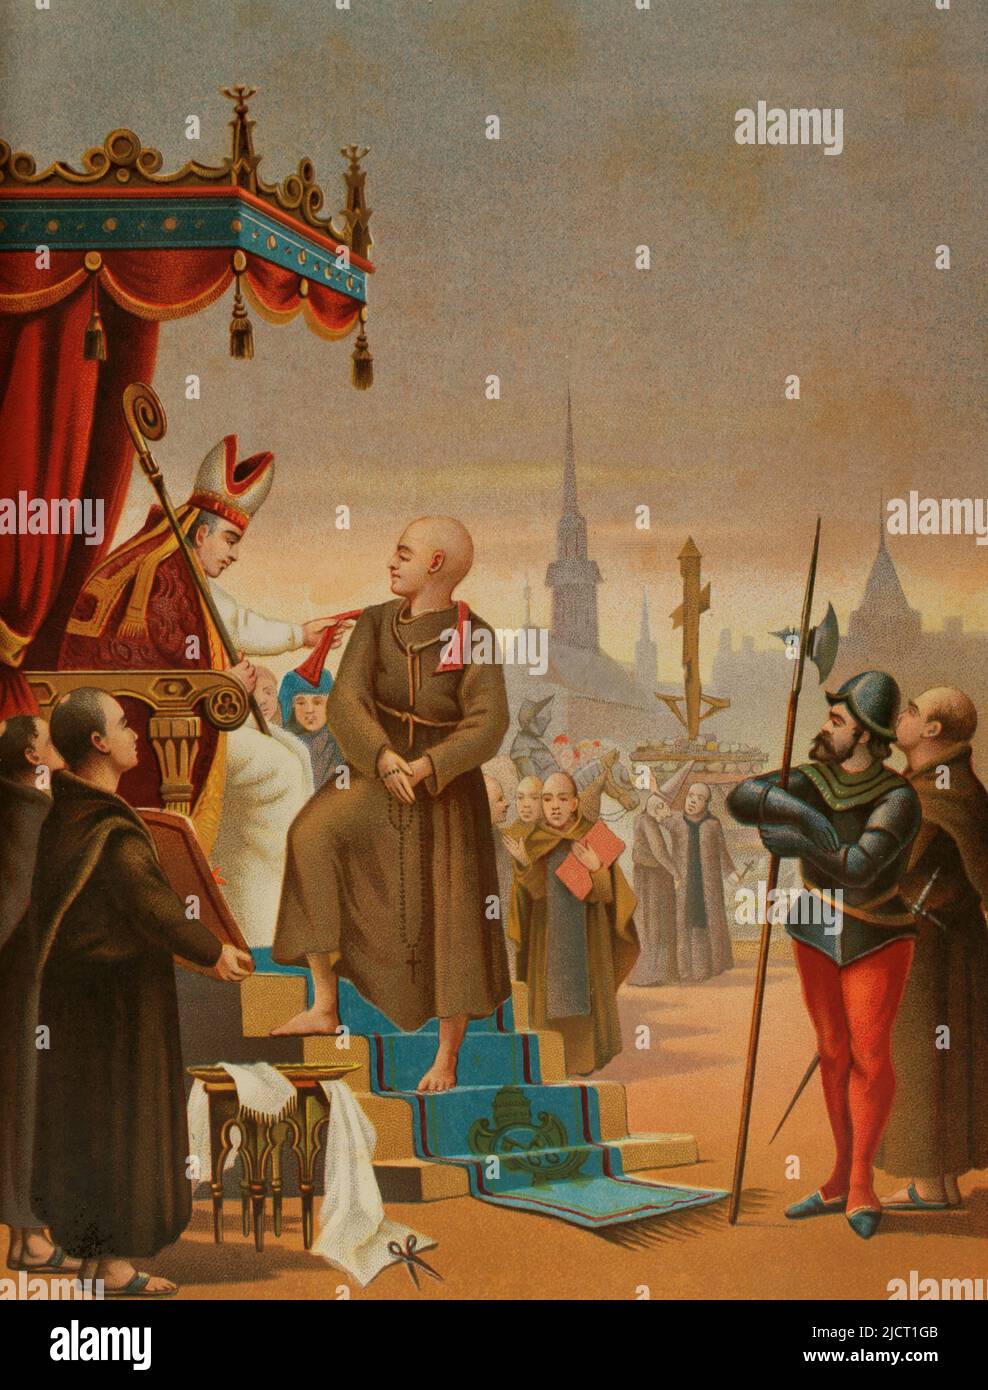 Girolamo Savonarola (1452-1498). Italian Dominican friar and preacher. Organiser of the Bonfire of the Vanities. Excommunicated and executed by the Tribunal of the Holy Inquisition. Degradation of Savonarola. Chromolithography. "Historia Universal" (Universal History), by César Cantú. Volume VII. Published in Barcelona, 1886. Stock Photo